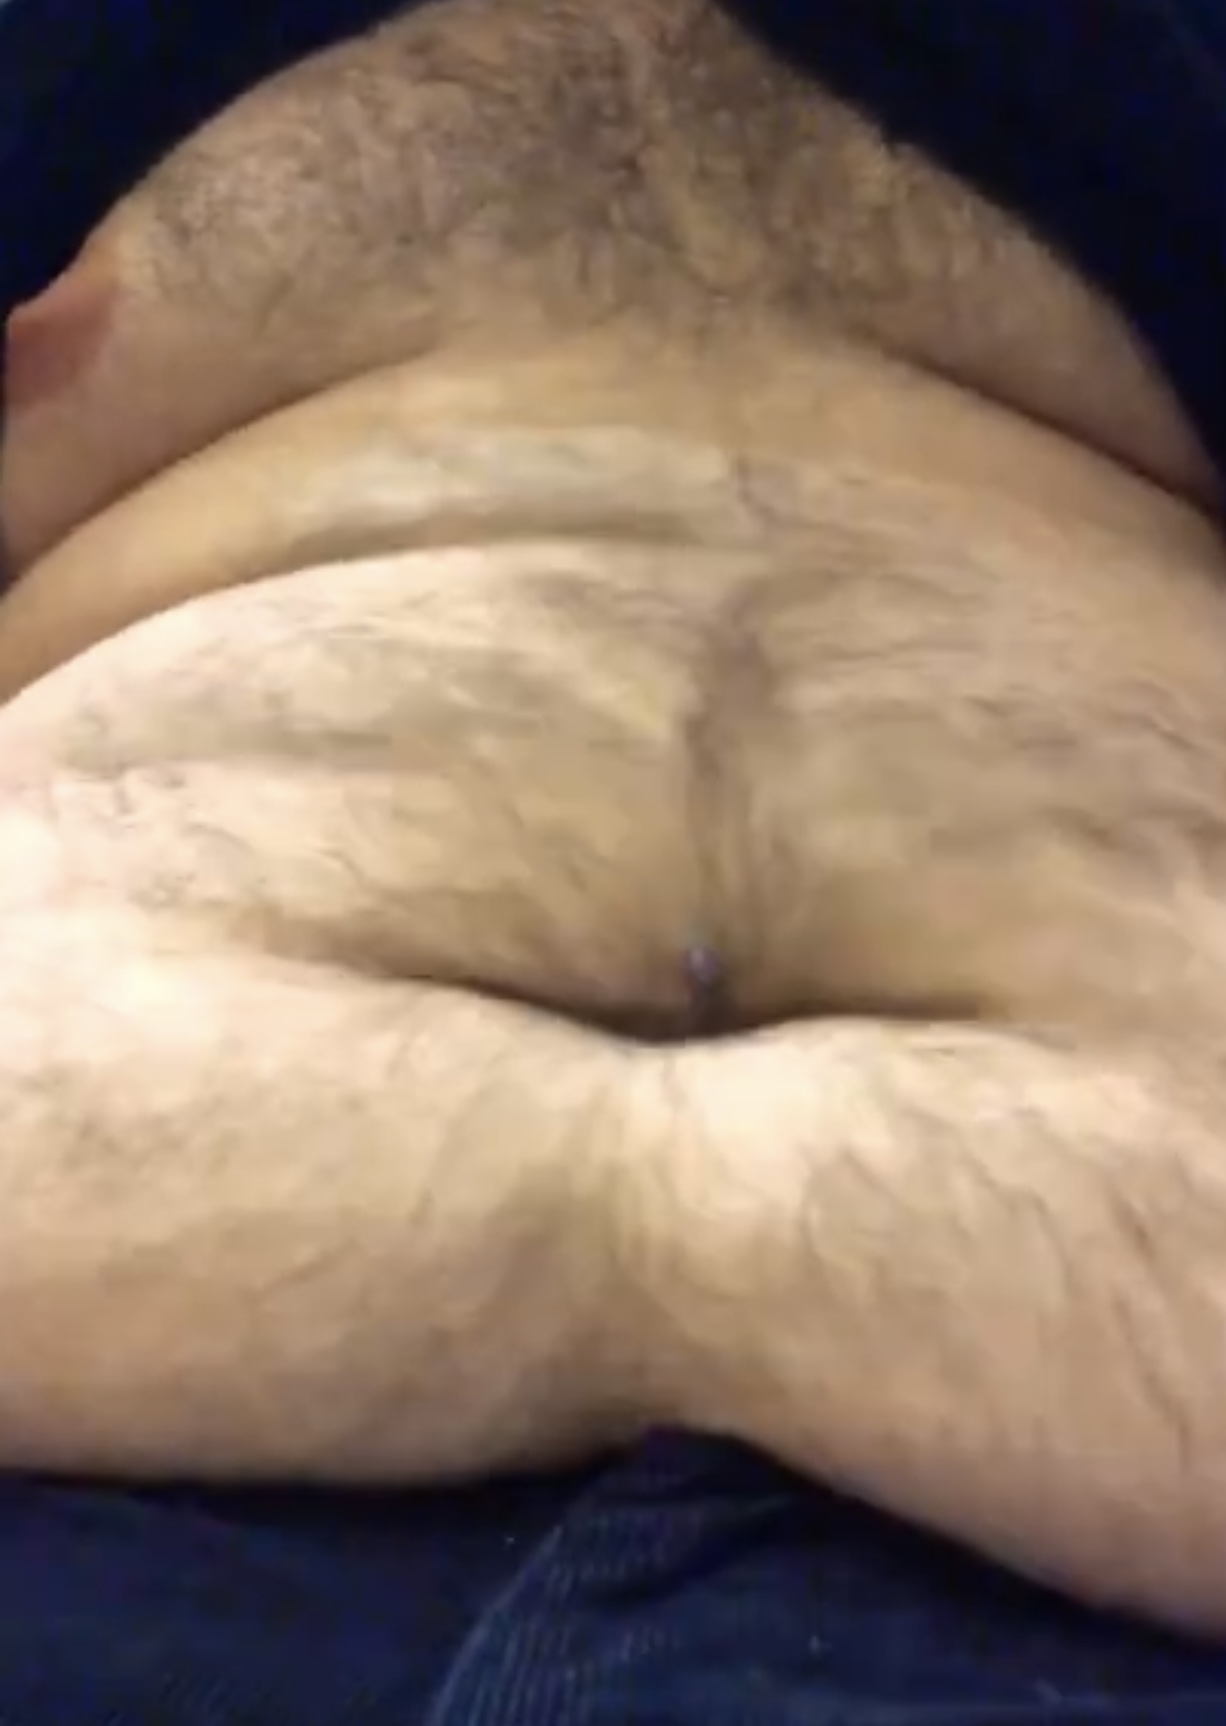 Guy with big gut rolls his stomach (part 2)